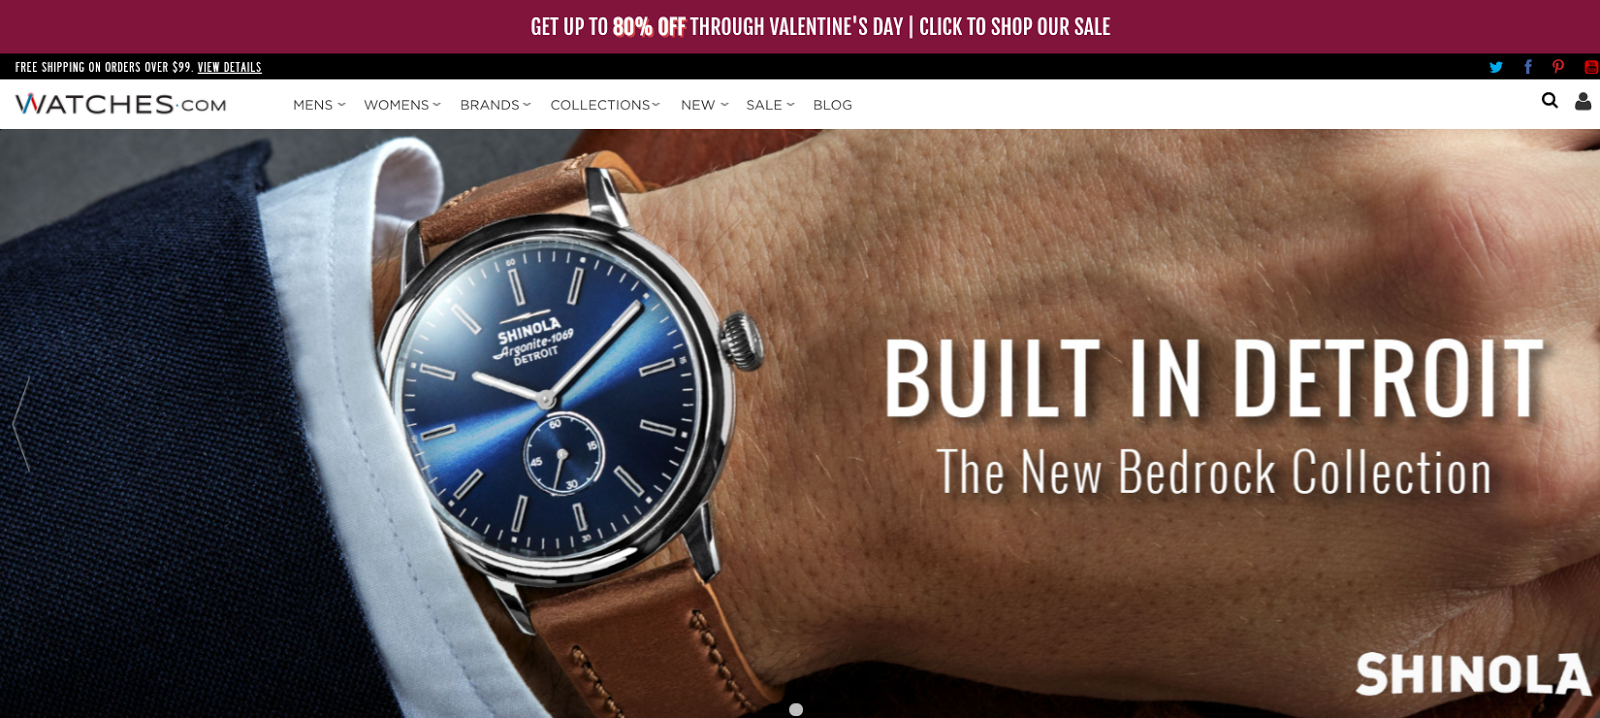 Display sales banners like Watches.com - Use a humorous exit popup like Startup Drugz - conversion optimization strategies